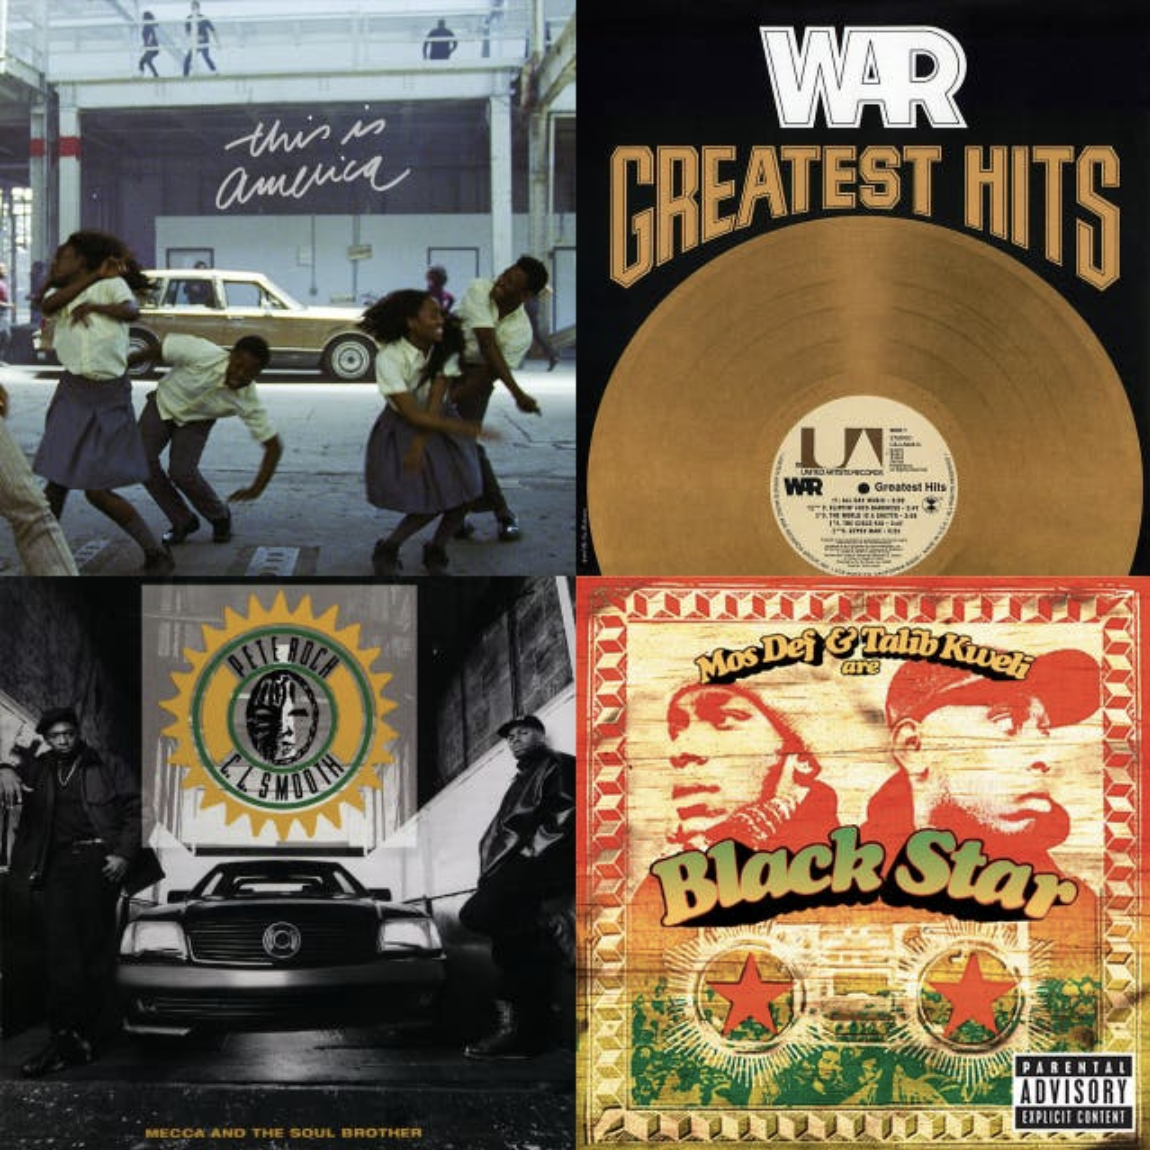 Four album covers arranged in a 2x2 square: Childish Gambino's This is America, War's Greatest Hits, Pete Rock and CL Smooth's Mecca and the Soul Brother, and Mos Def and Talib Kweli's Black Star.